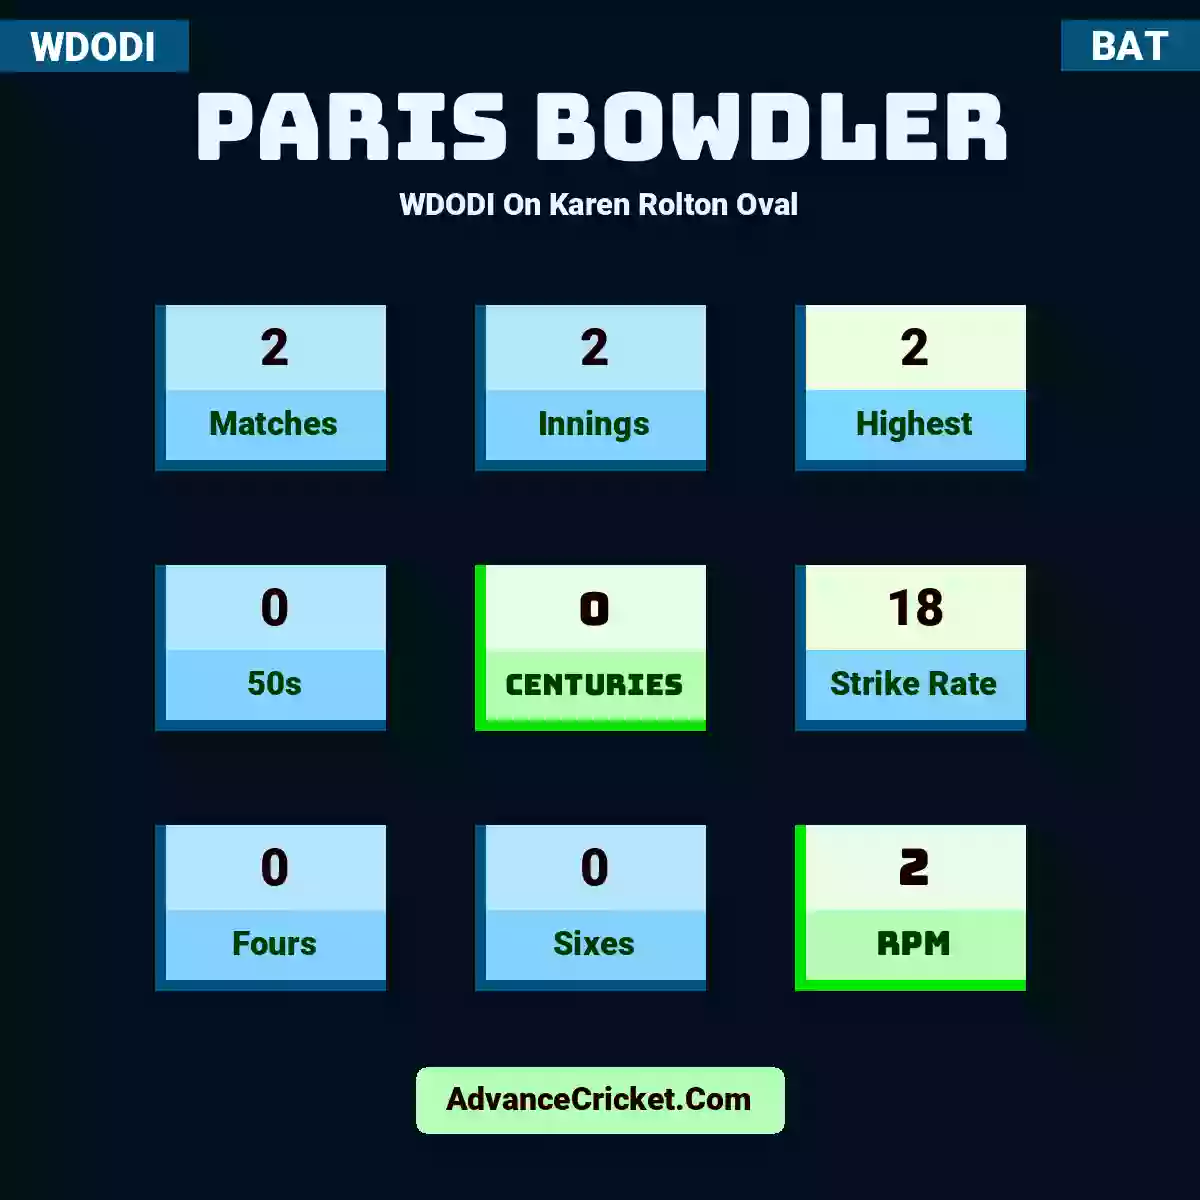 Paris Bowdler WDODI  On Karen Rolton Oval, Paris Bowdler played 2 matches, scored 2 runs as highest, 0 half-centuries, and 0 centuries, with a strike rate of 18. P.Bowdler hit 0 fours and 0 sixes, with an RPM of 2.